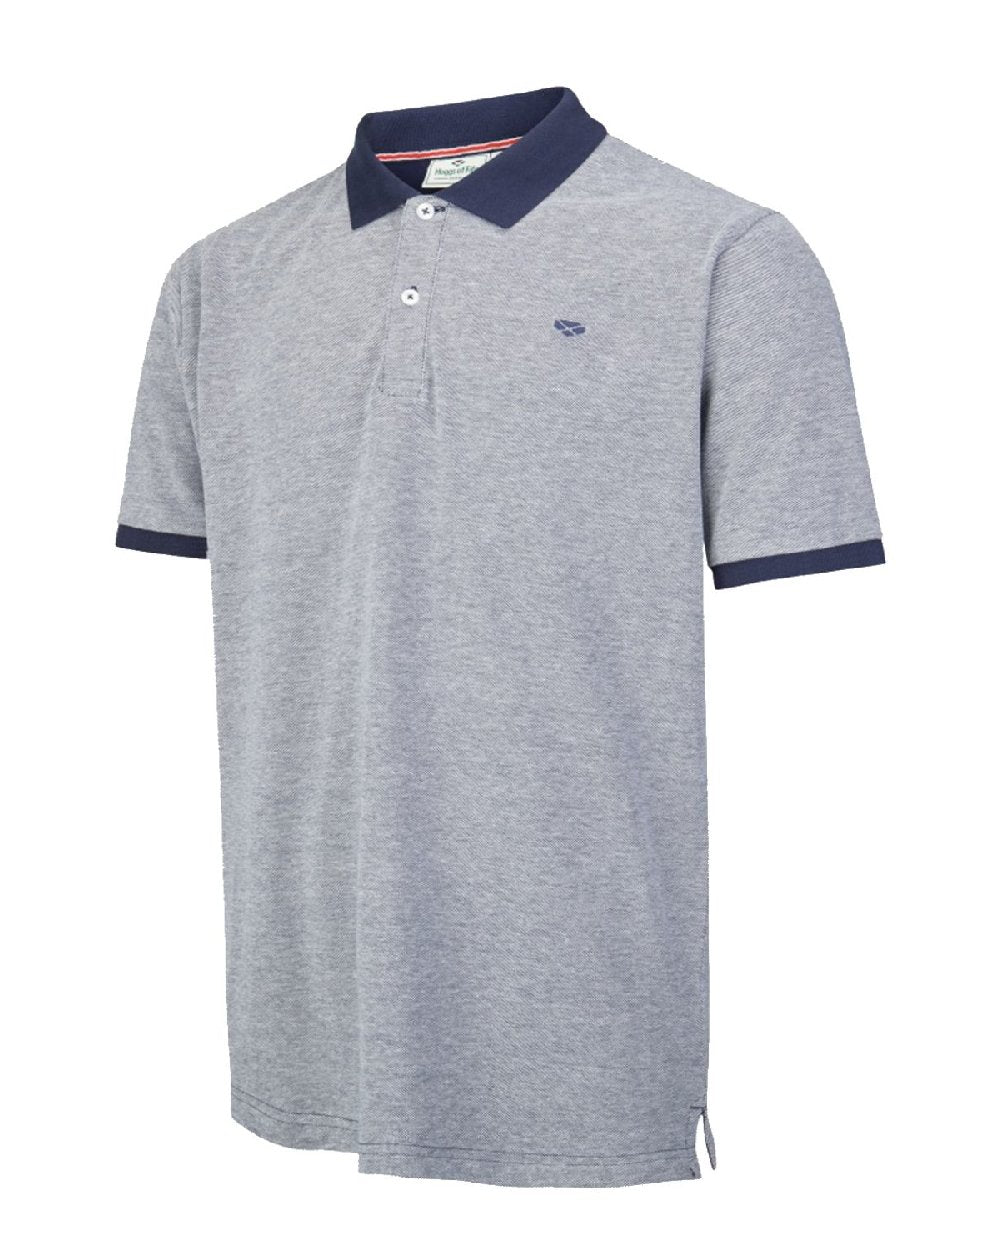 Grey Marl coloured Hoggs of Fife Largs Pique Polo Shirt on white background 